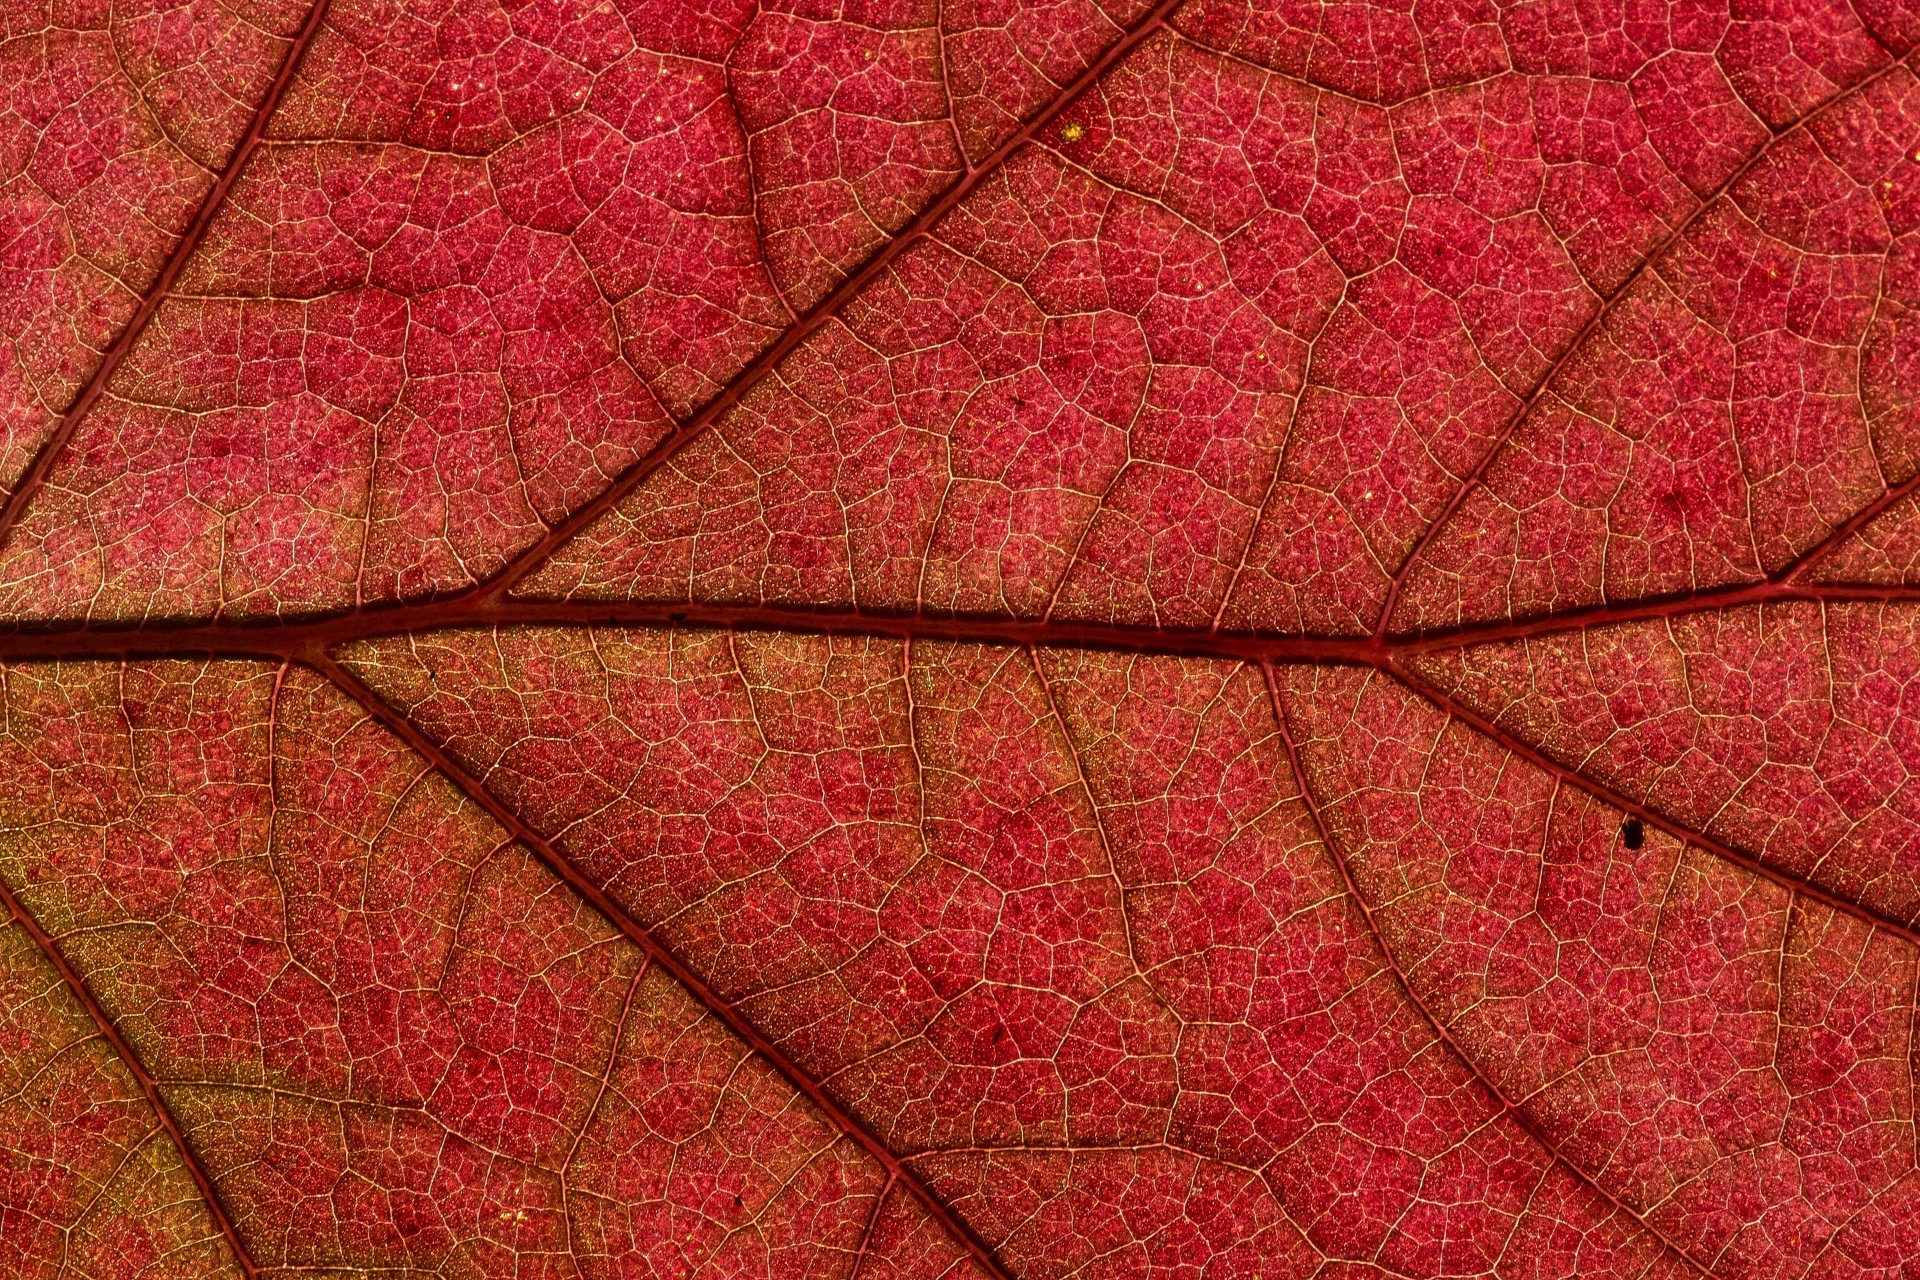 Download Leaf Nature Close-up Red Photography Macro 4k Ultra HD Wallpaper